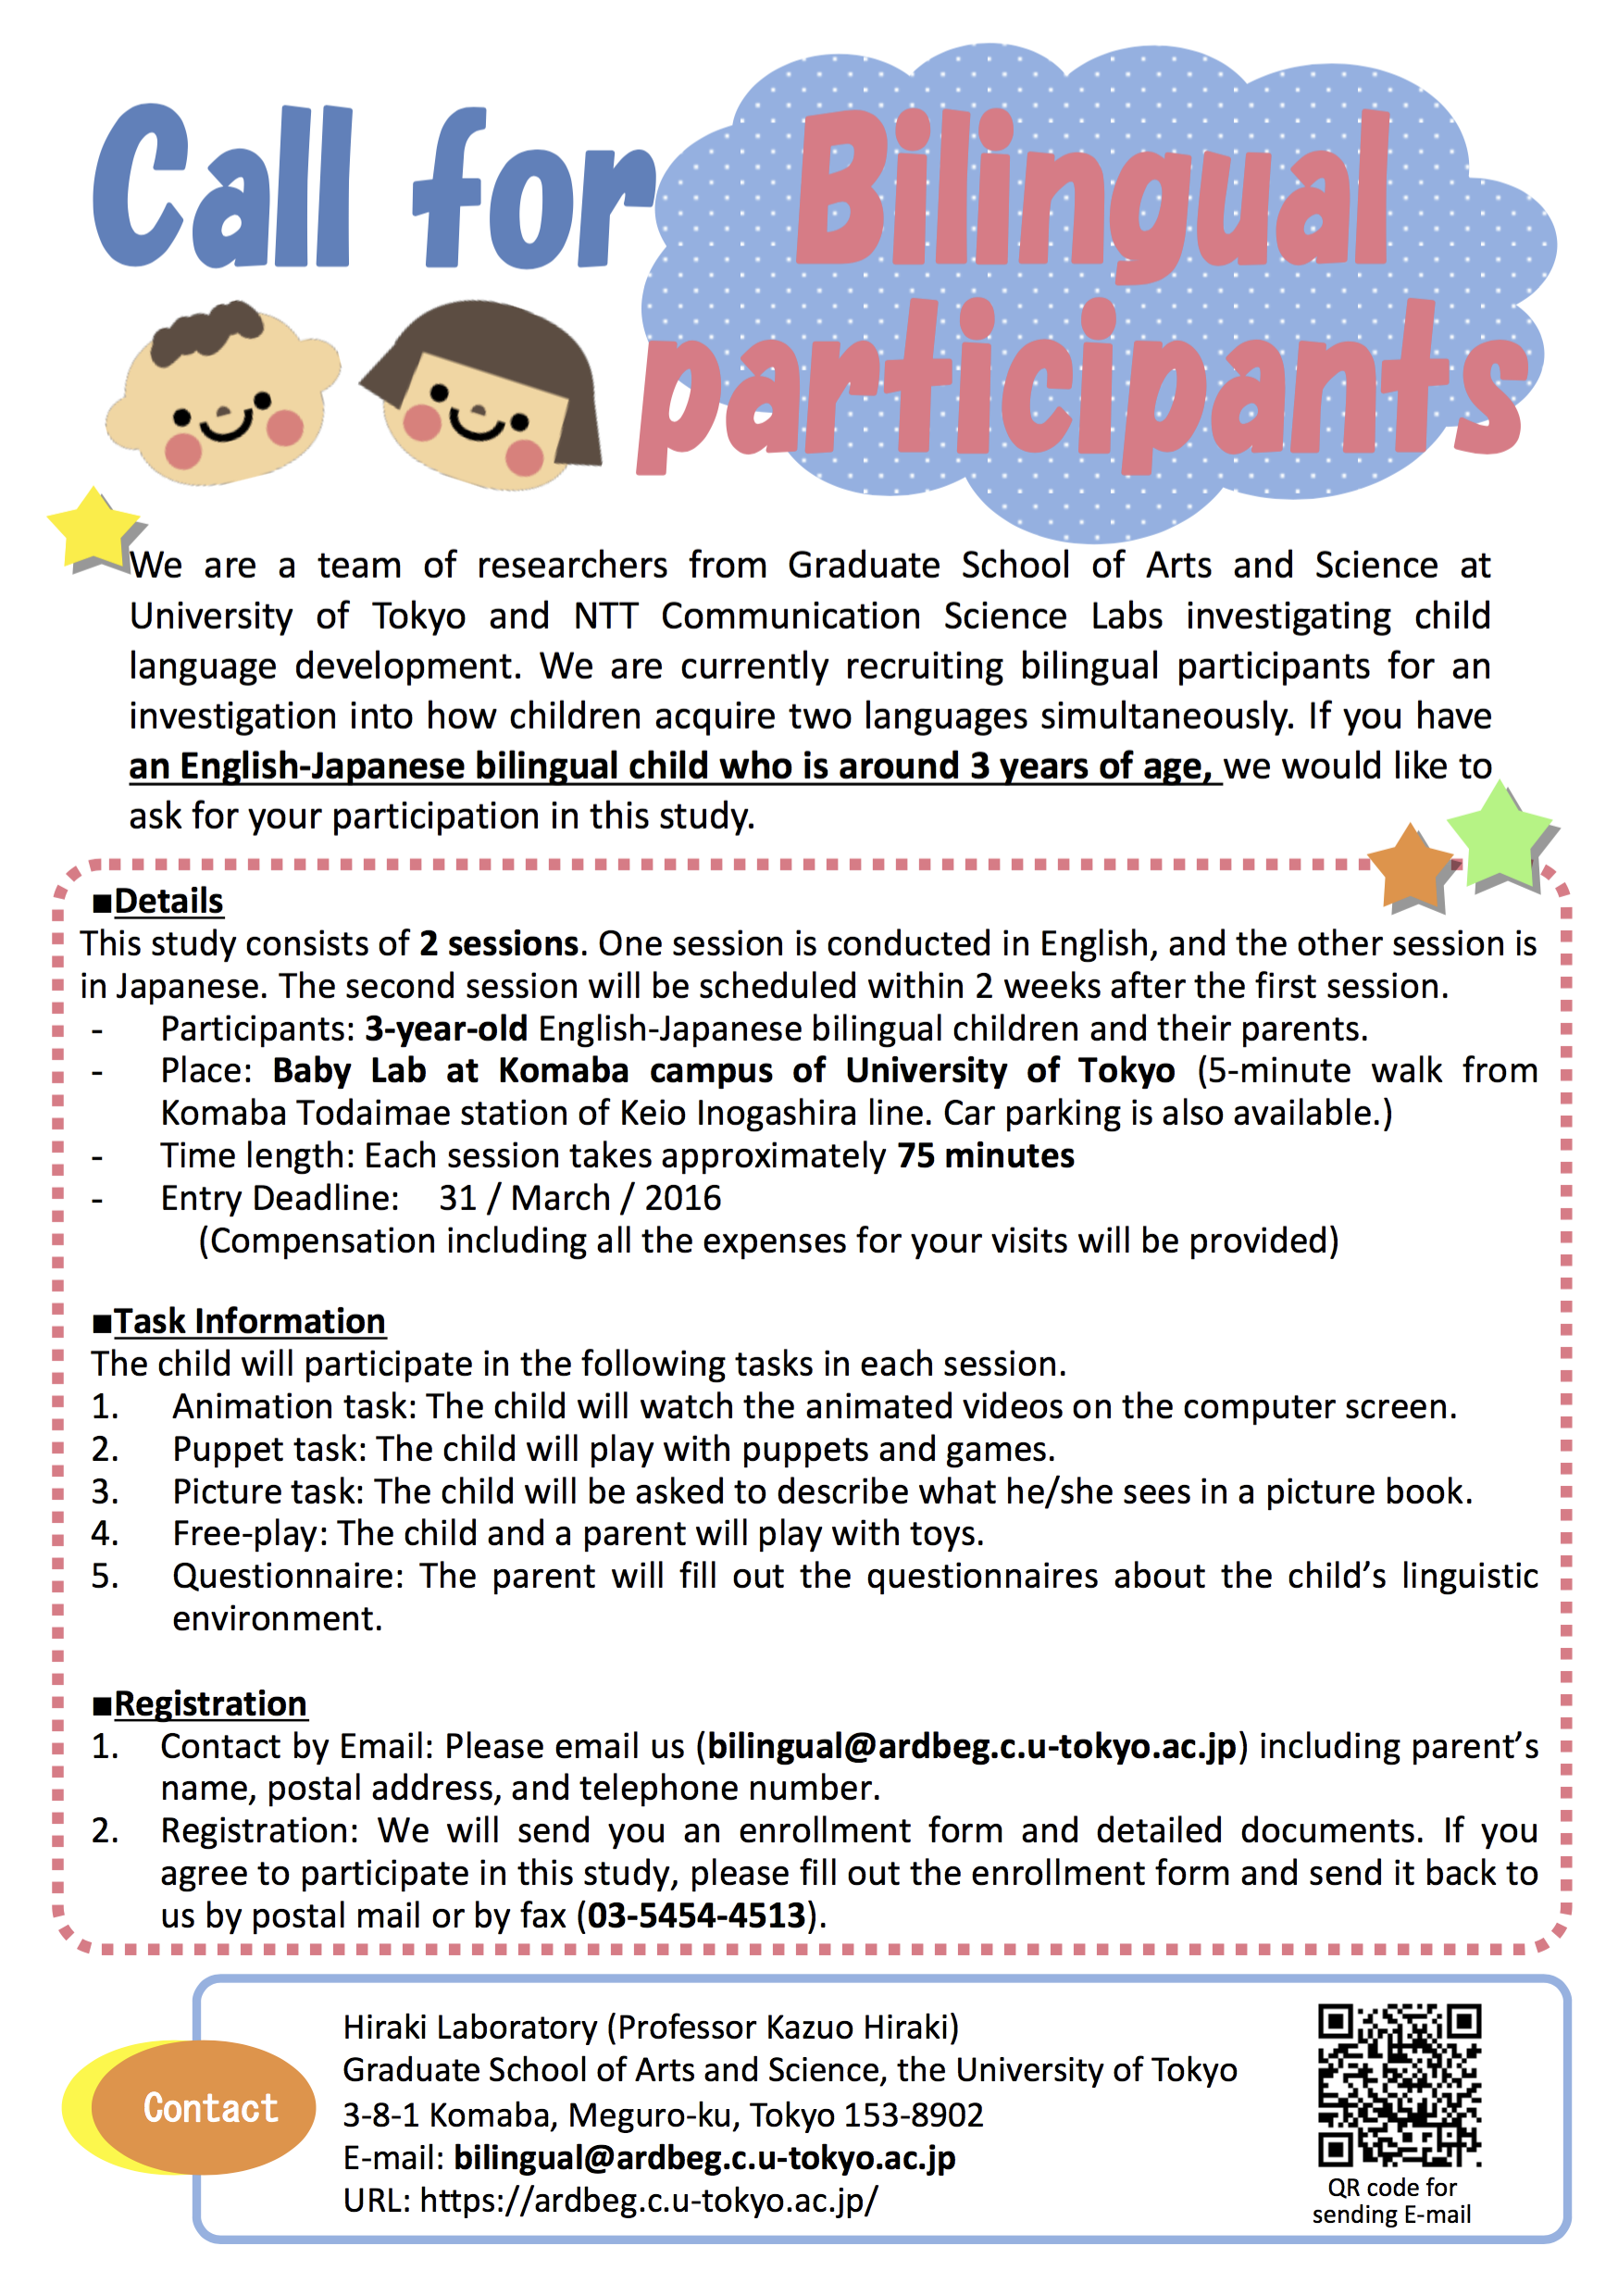 We are a team of researchers from Graduate School of Arts and Science at University of Tokyo and NTT Communication Science Labs investigating child language development. We are currently recruiting bilingual participants for an investigation into how children acquire two languages simultaneously. If you have an English-Japanese bilingual child who is around 3 years of age, we would like to ask for your participation in this study.